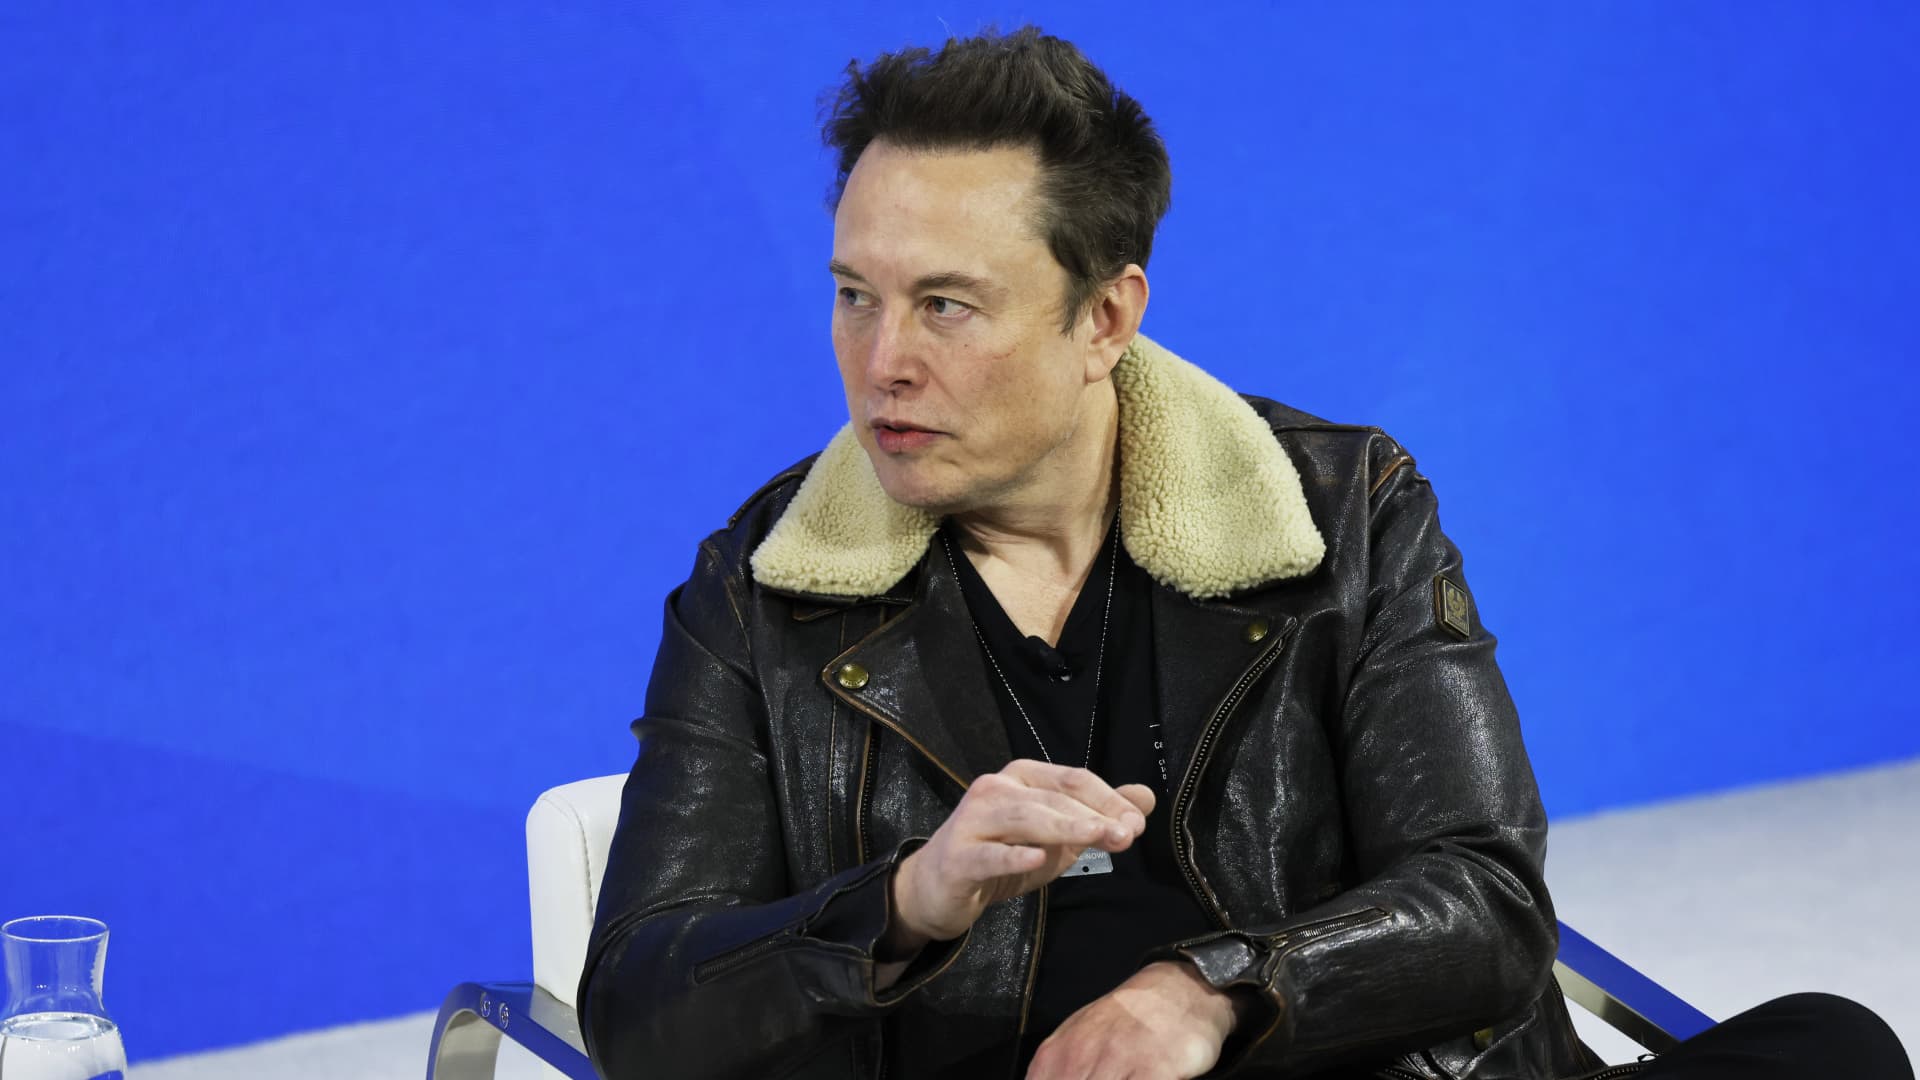 Elon Musk says advertisers trying to 'blackmail' him: 'Go f--- yourself'